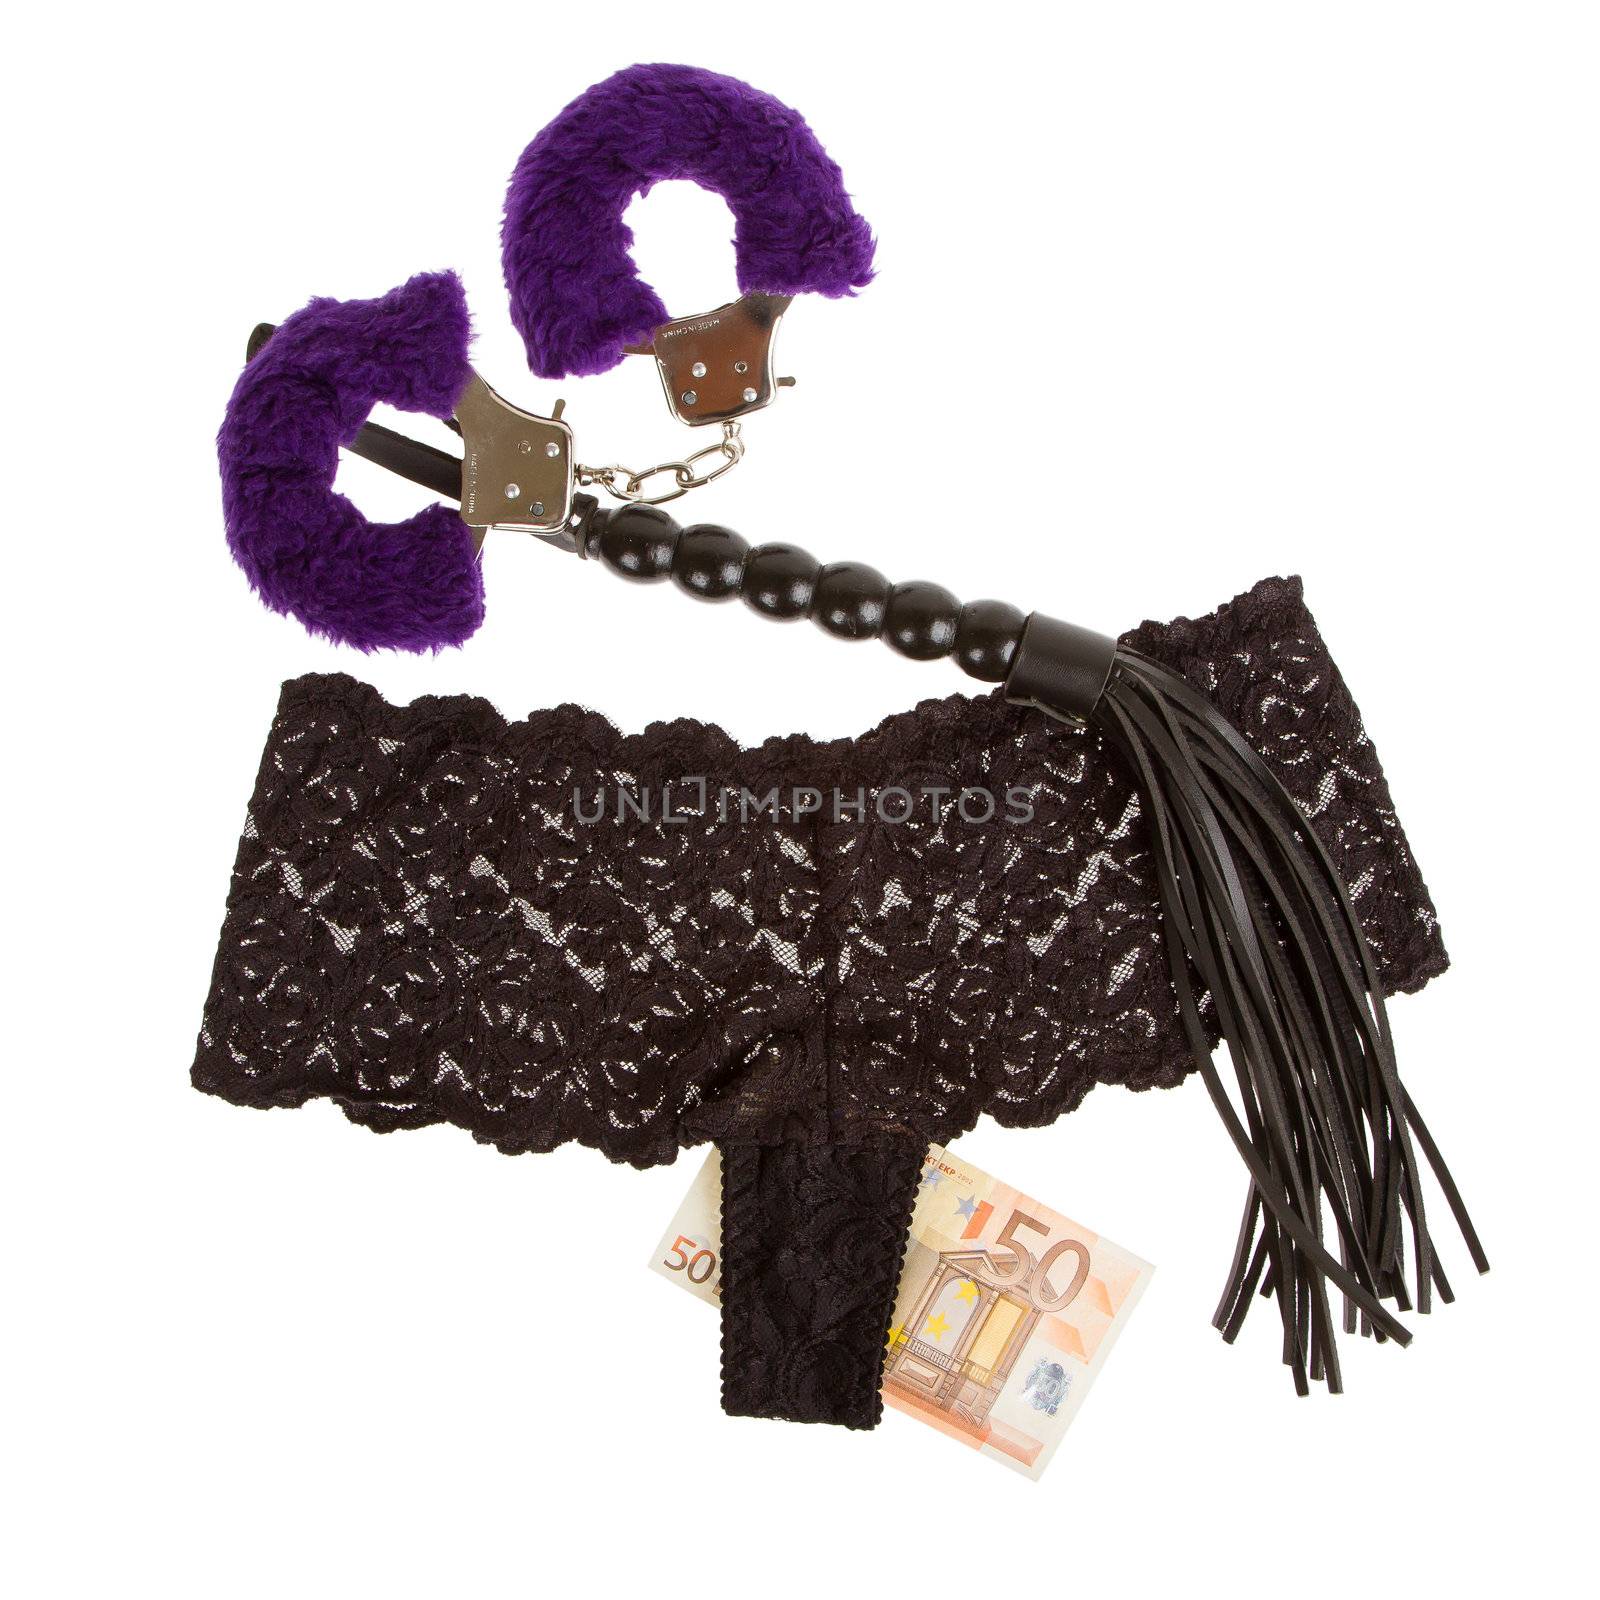 Fluffy purple handcuffs, a whip, money and panties on a white background, prostitution